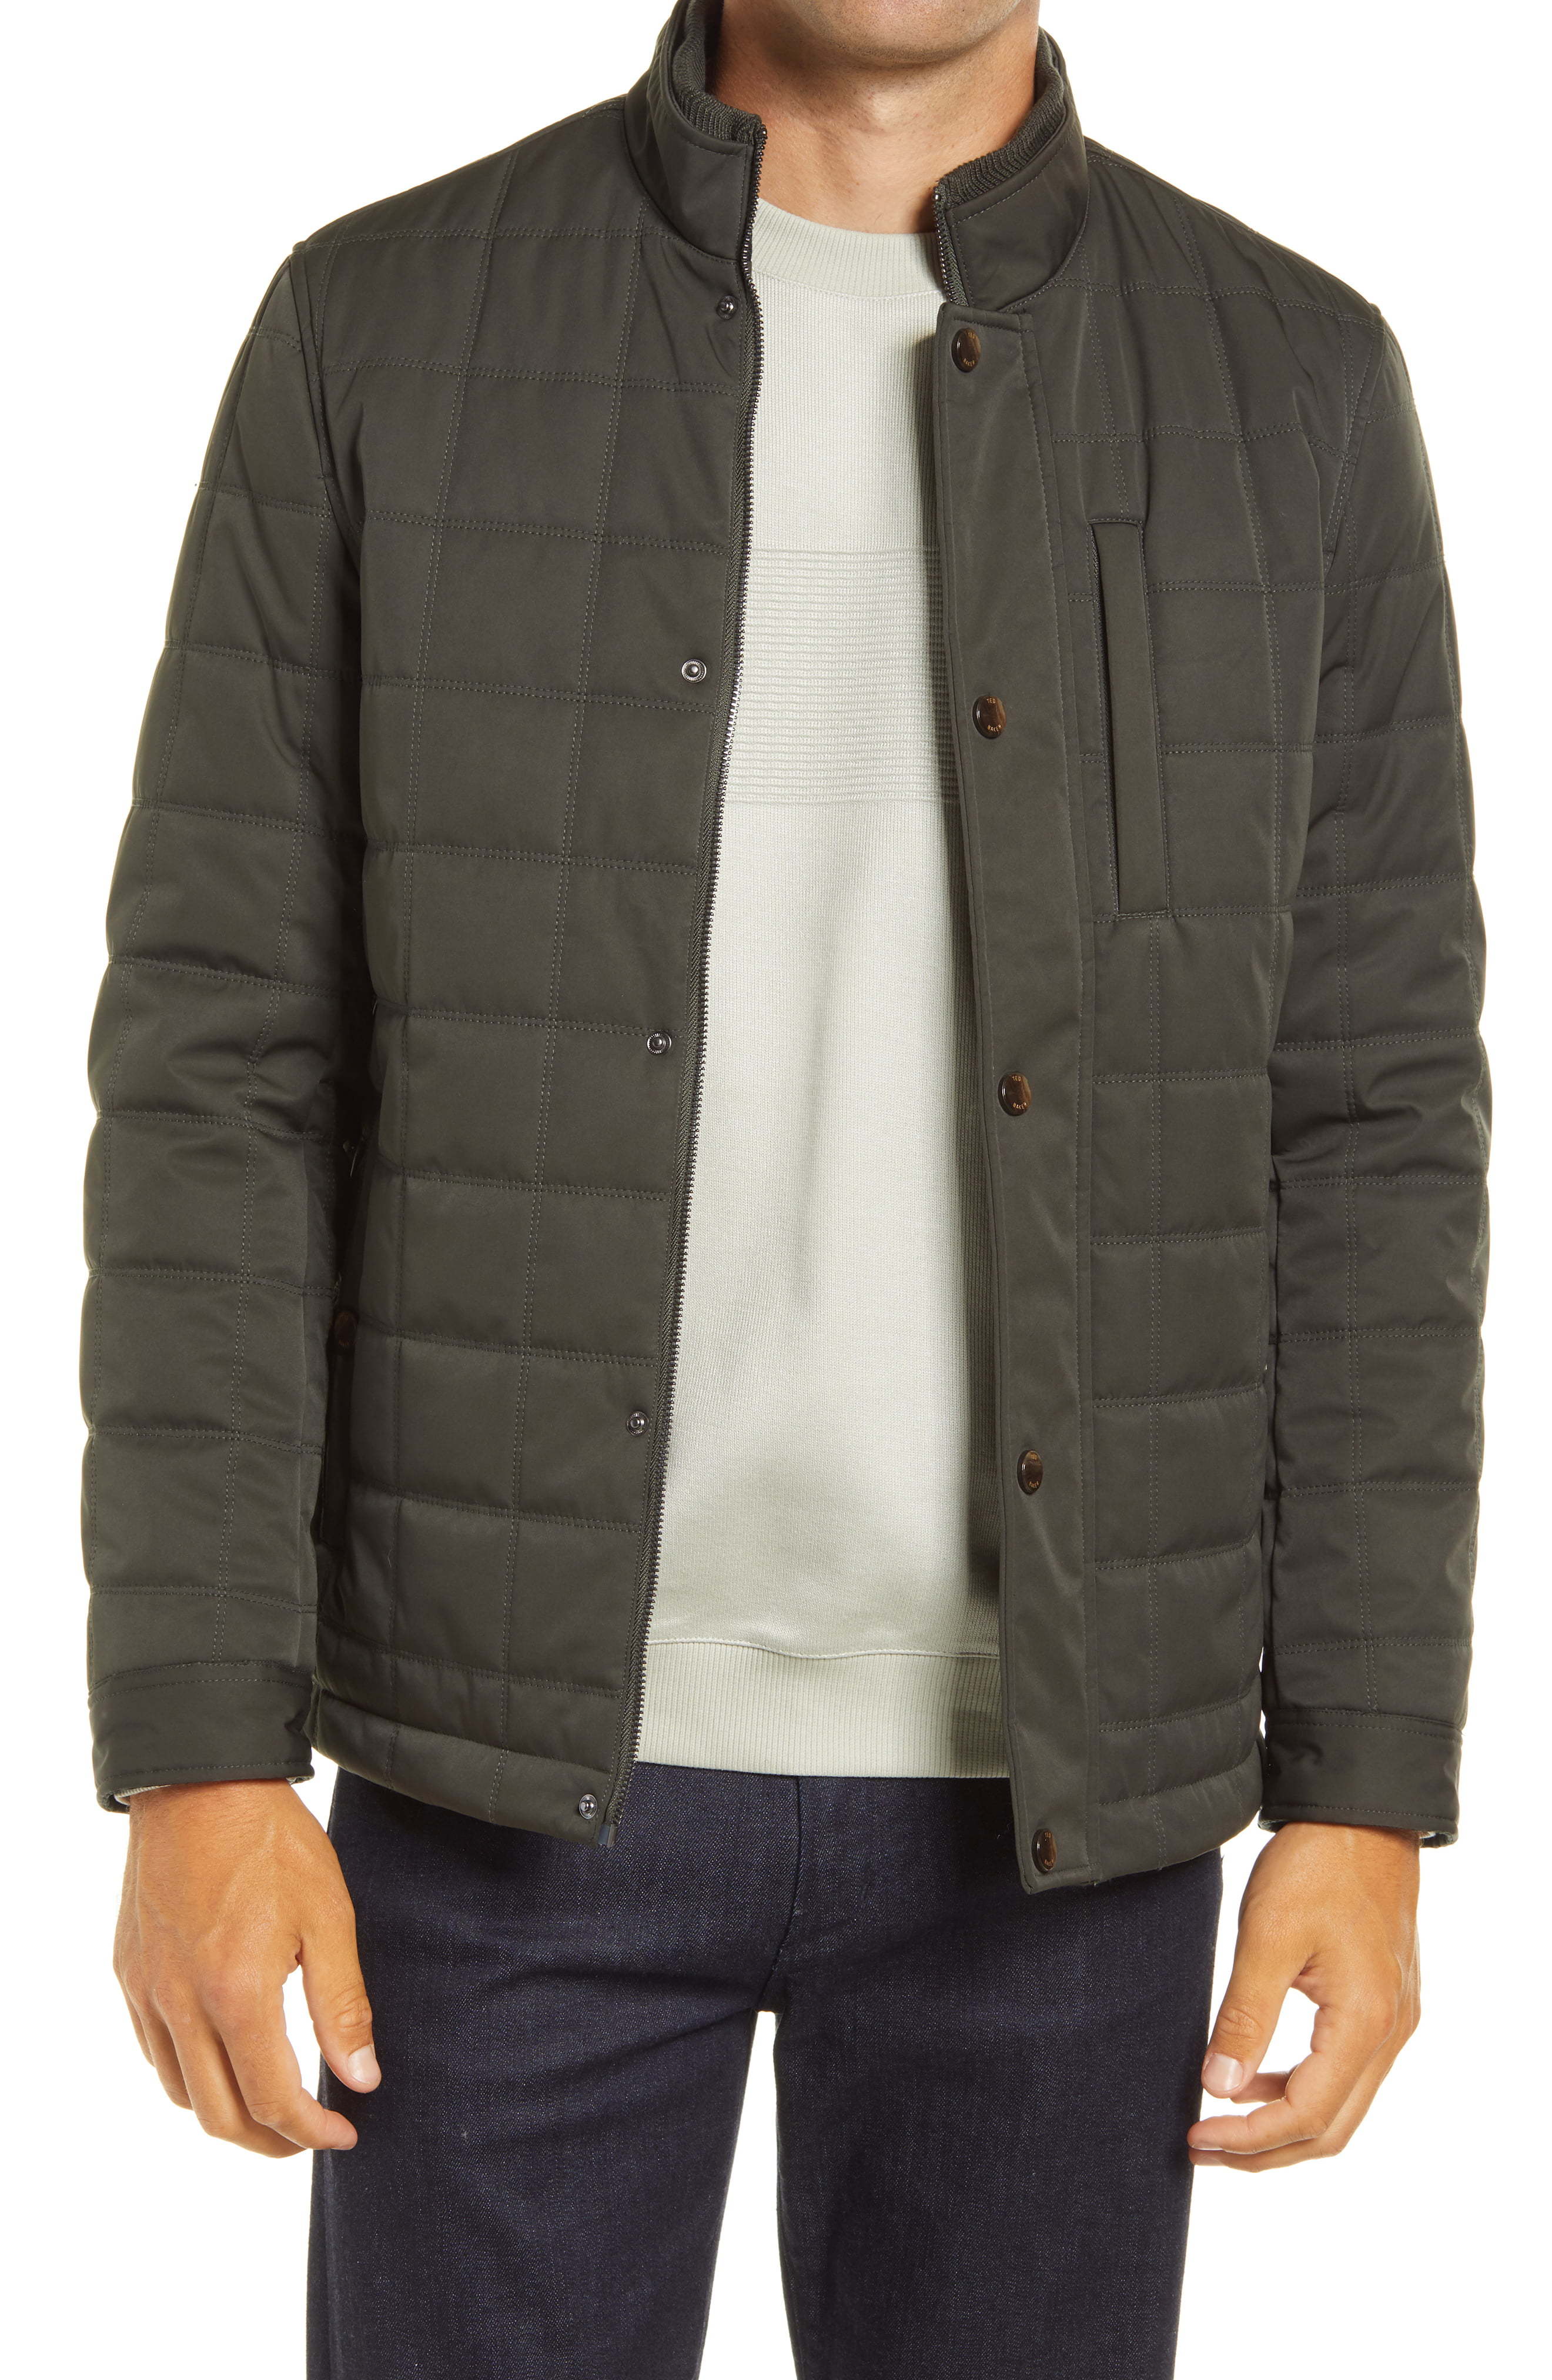 Ted Baker London Trent Quilted Jacket, $395 | Nordstrom | Lookastic